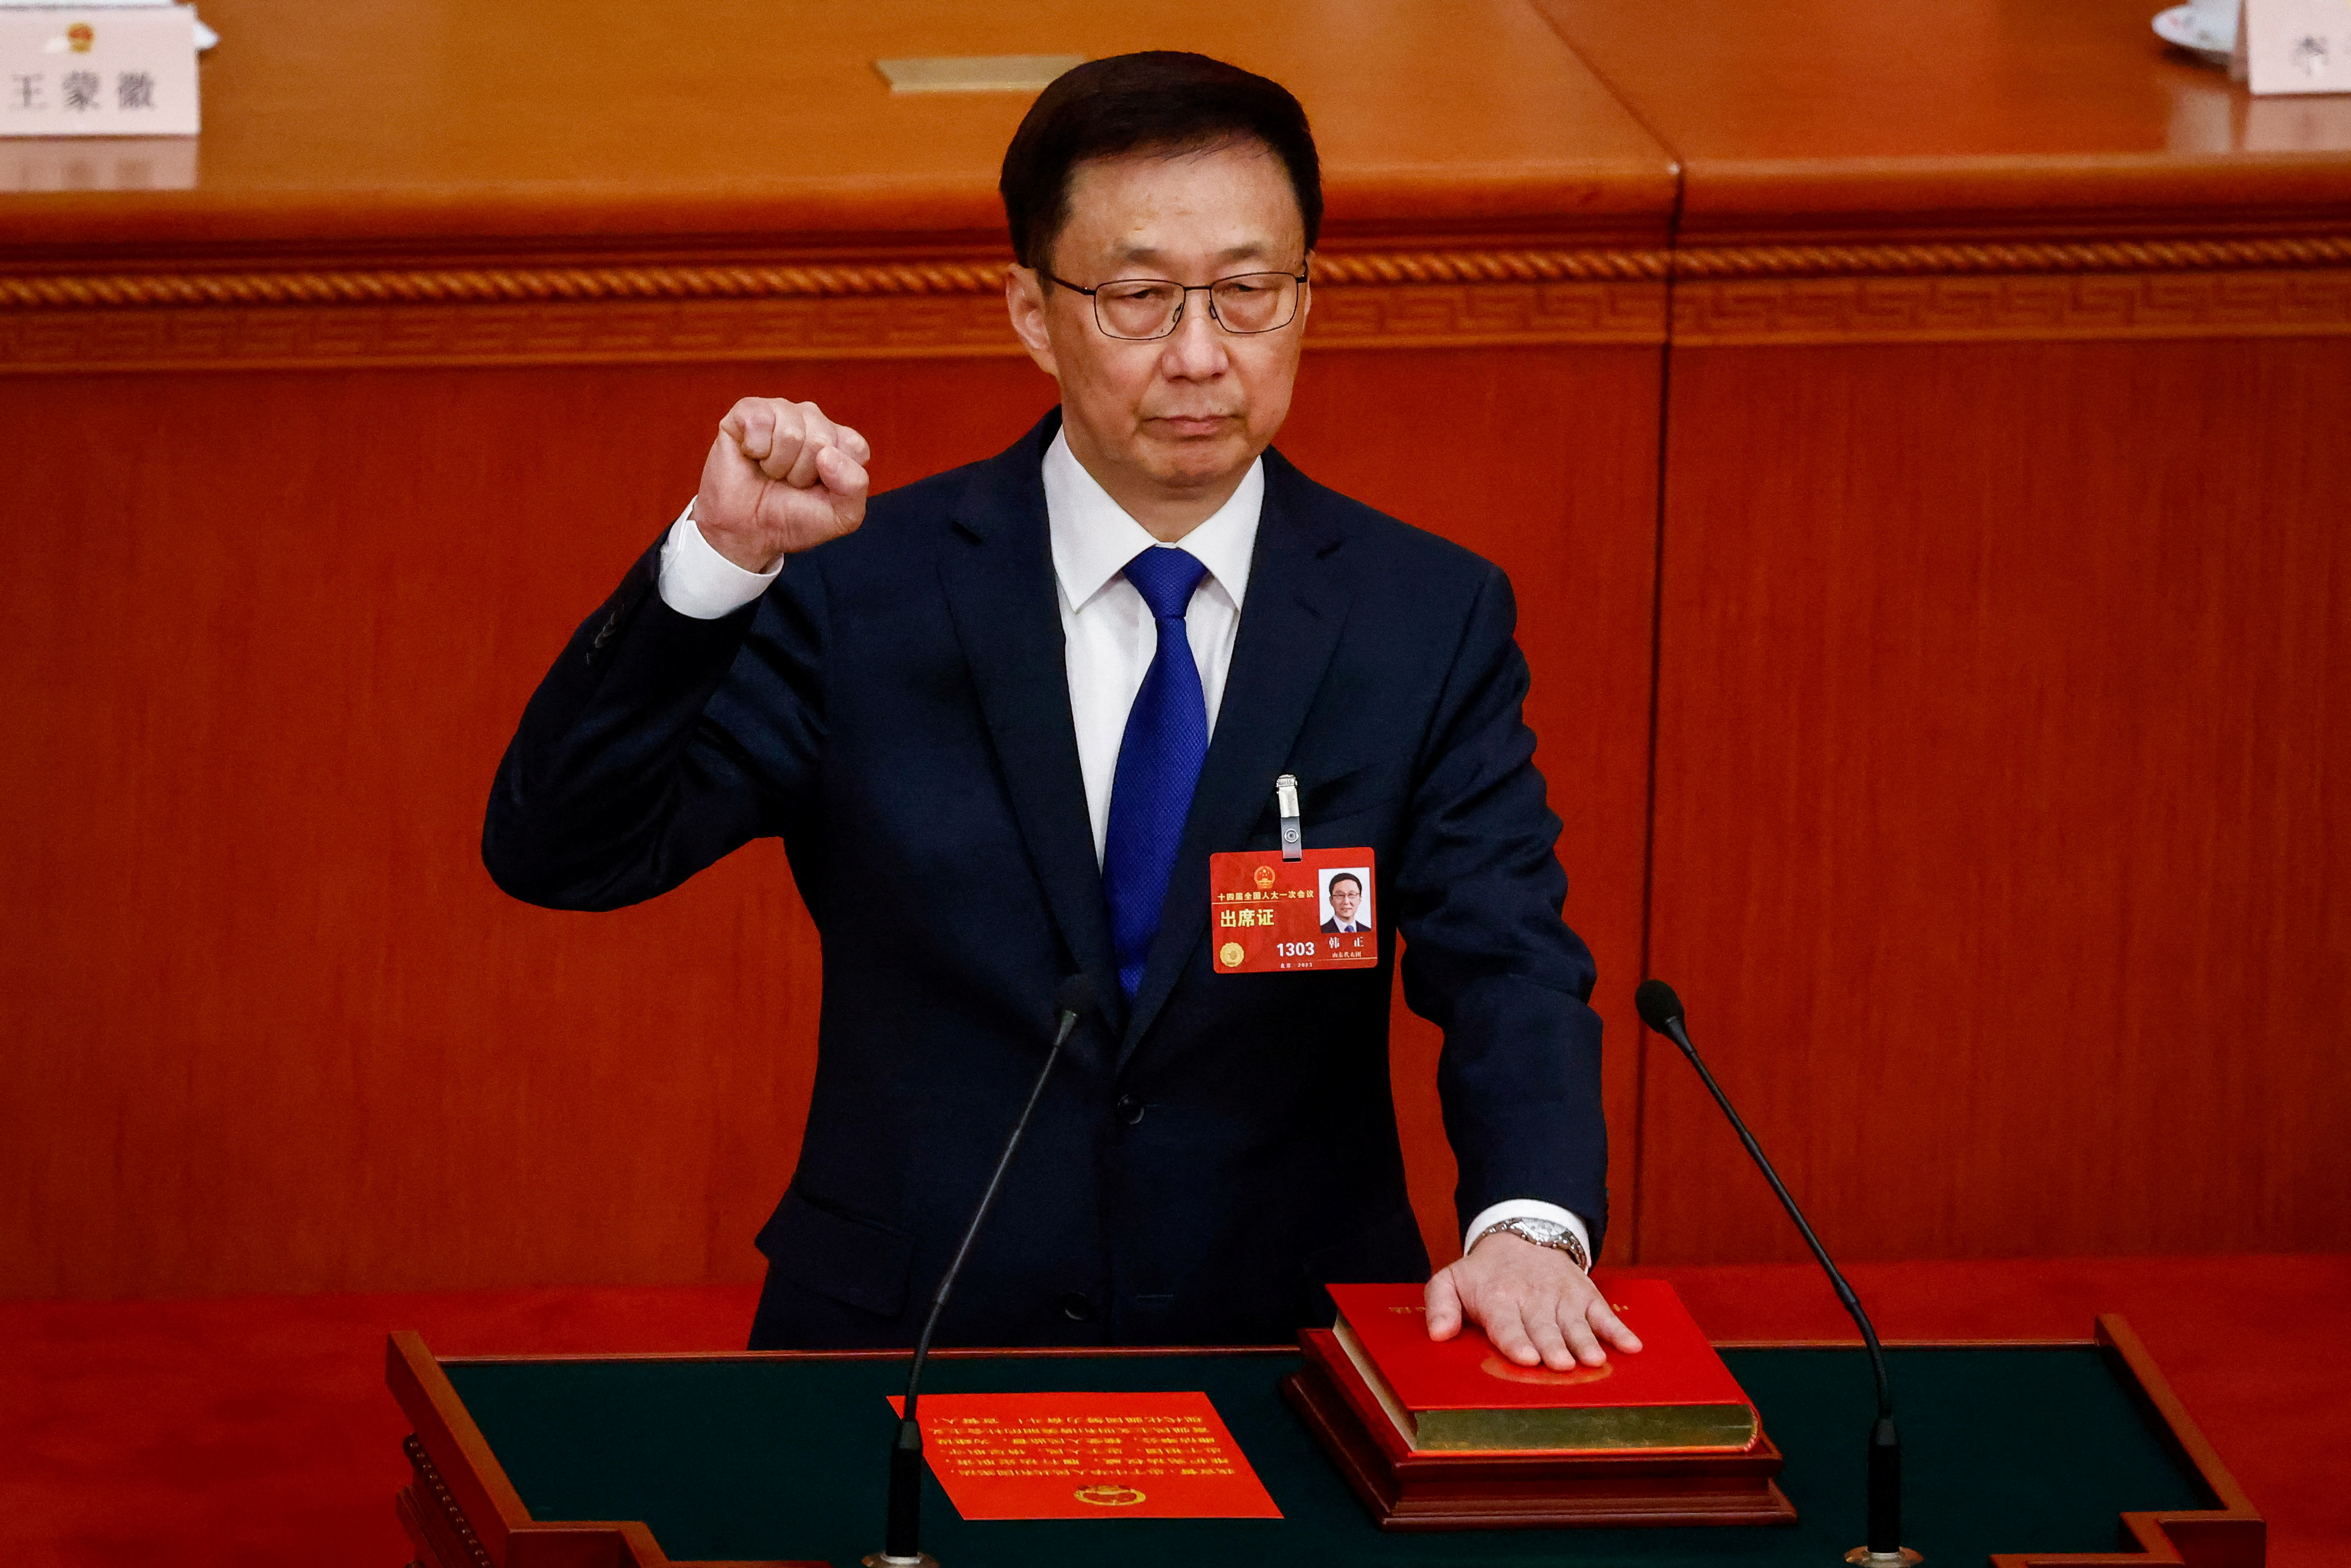 Third Plenary Session of the National People's Congress (NPC)